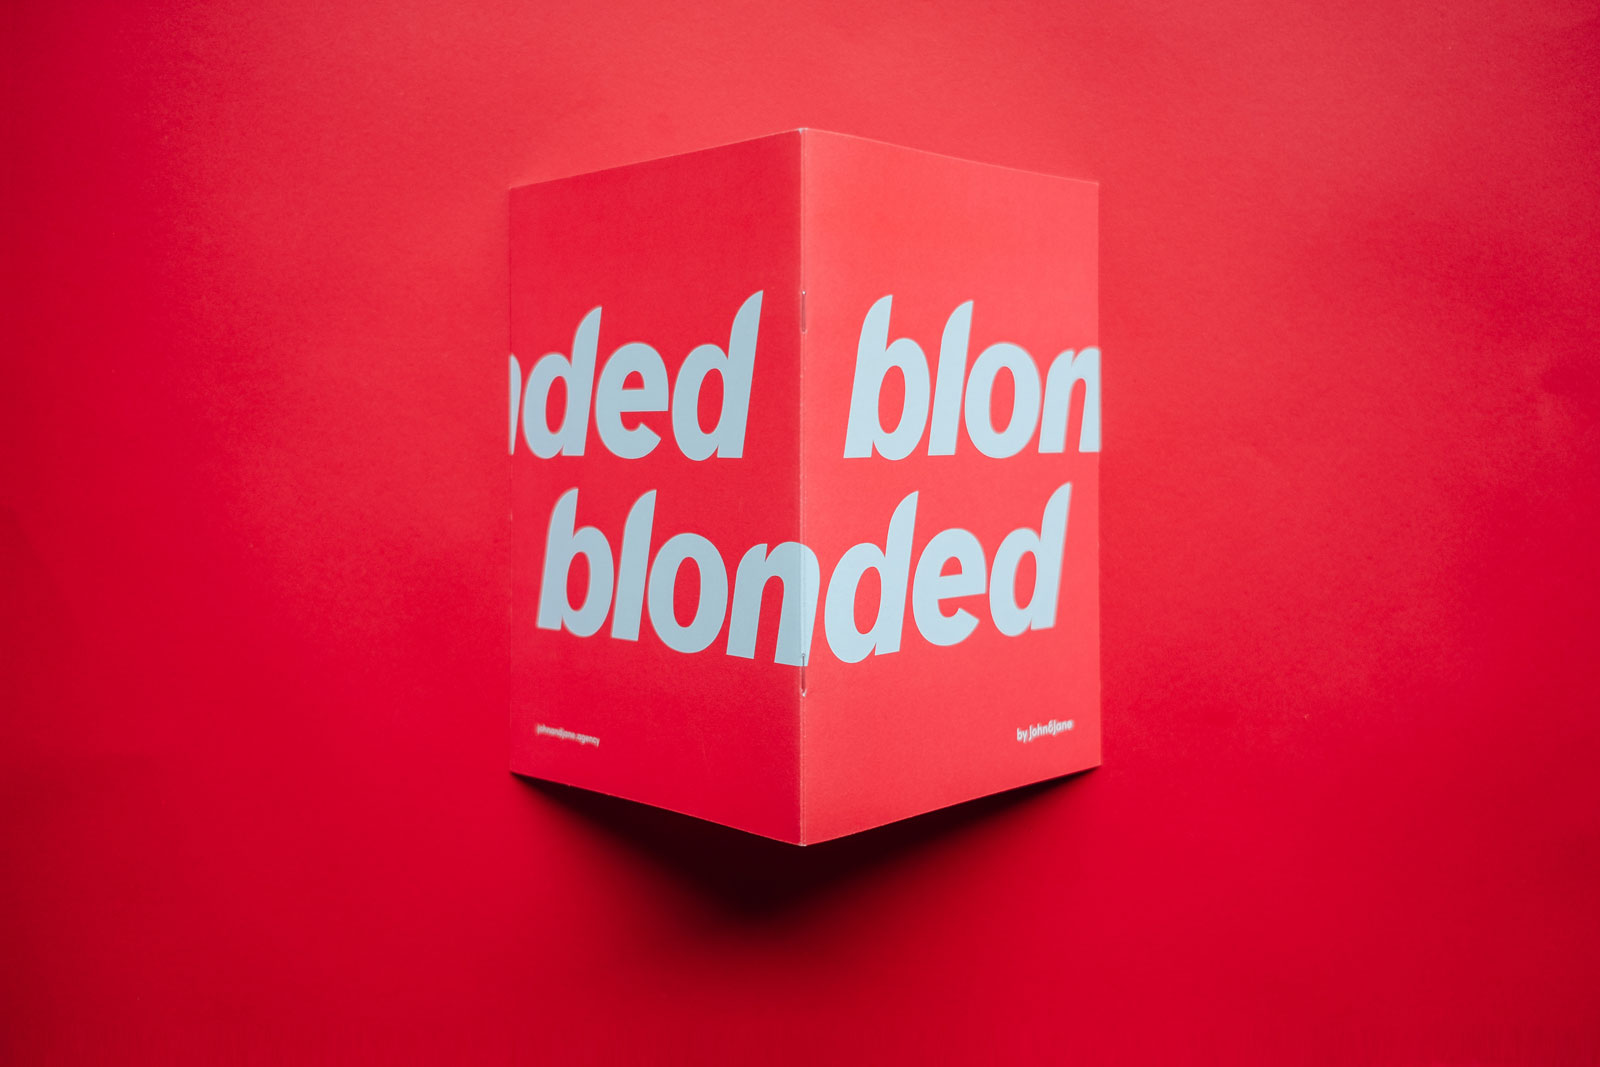 Frank Ocean Blonde Typography Type Blonded Graphic Design